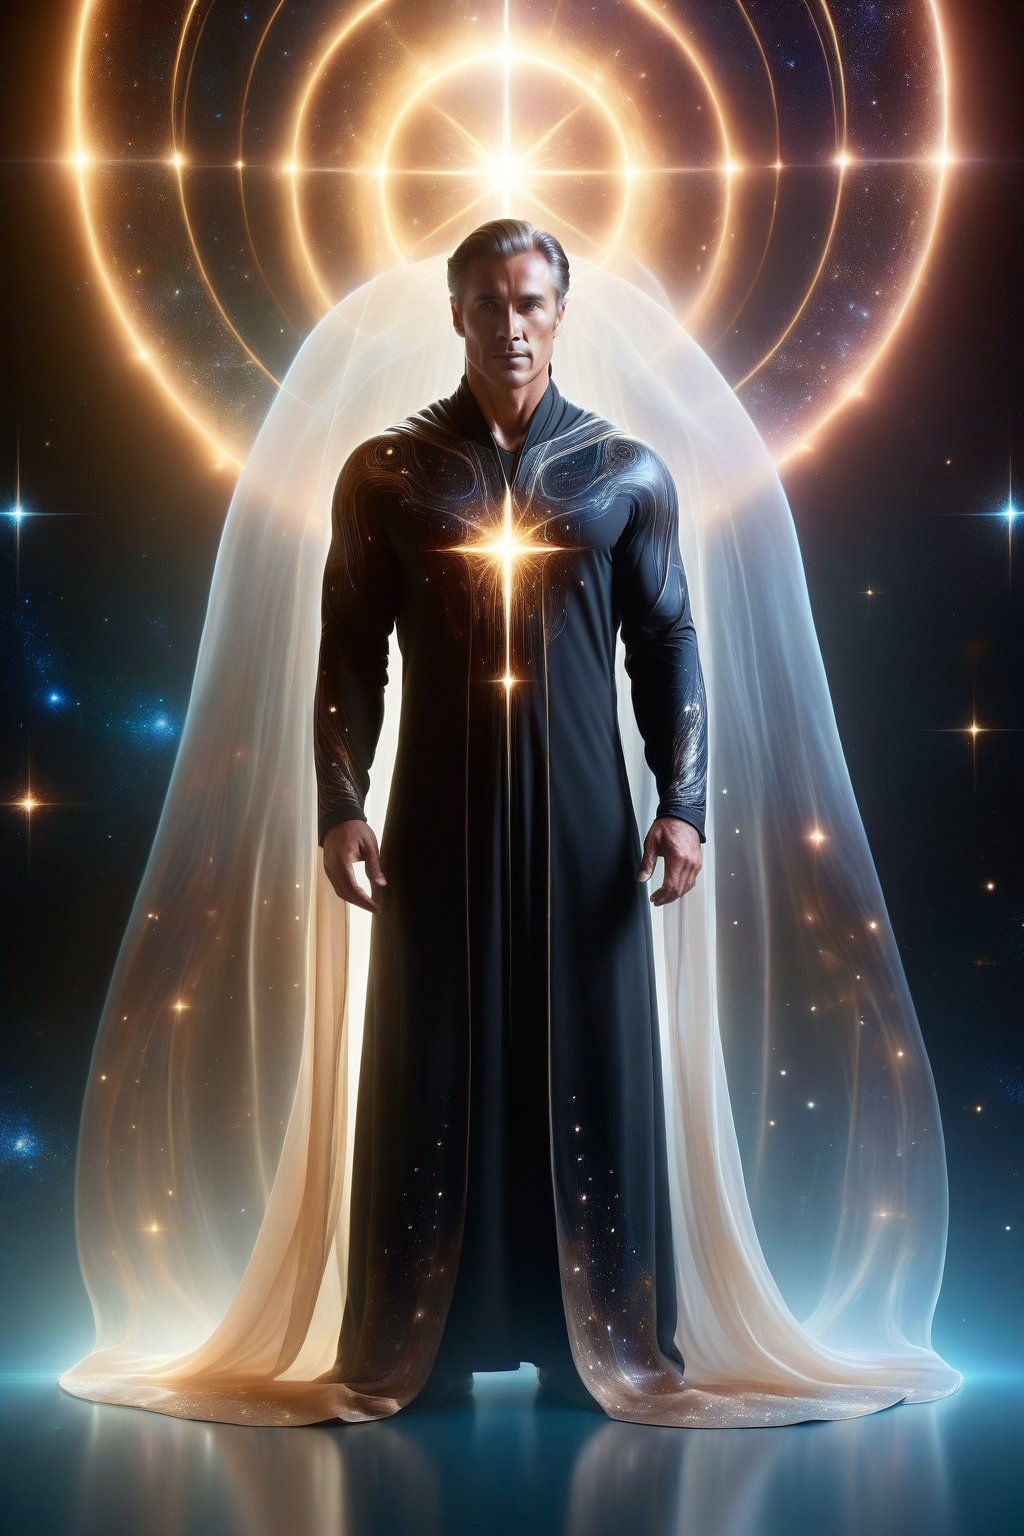 The man wears a black robe that flows like a waterfall of ink. His muscles are visible through the translucent fabric, but the tunic is adorned with stars that seem to shine with a light of their own. His intimate area is covered by a cosmic energy shield that resembles a miniature black hole, with lines of energy extending into space.